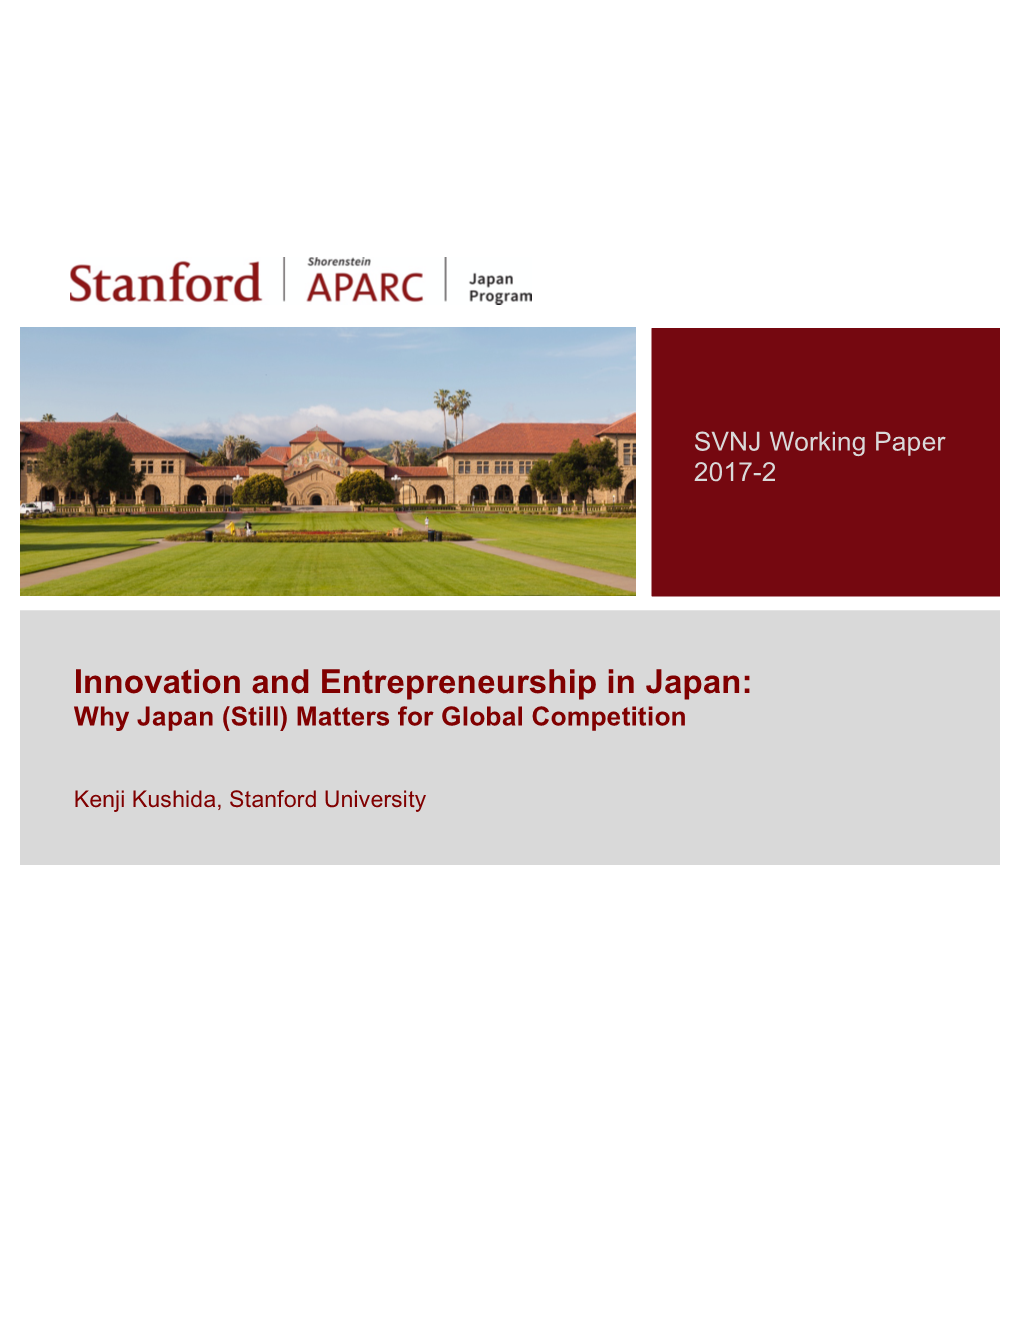 Innovation and Entrepreneurship in Japan: Why Japan (Still) Matters for Global Competition